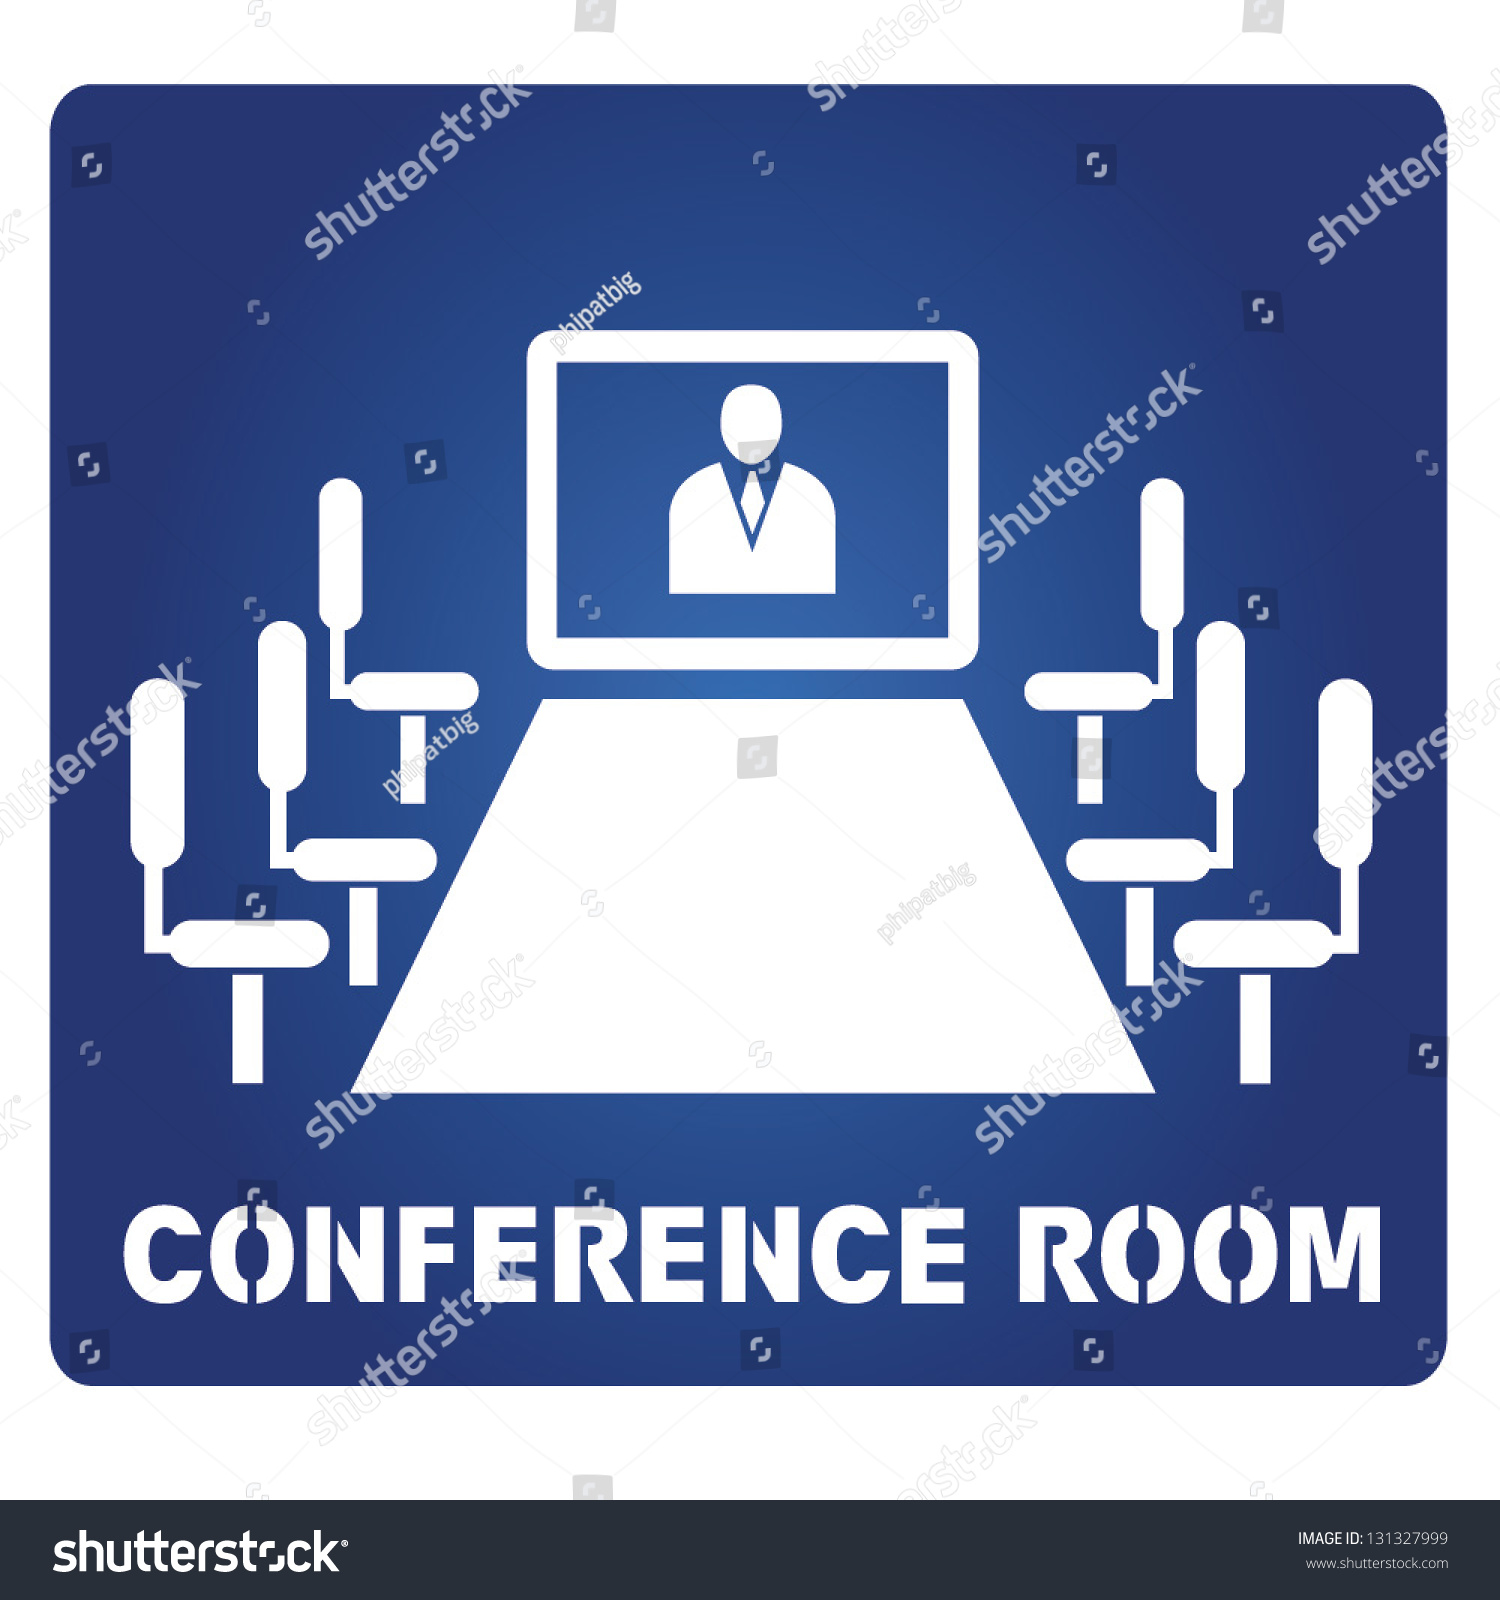 conference room clipart free - photo #26